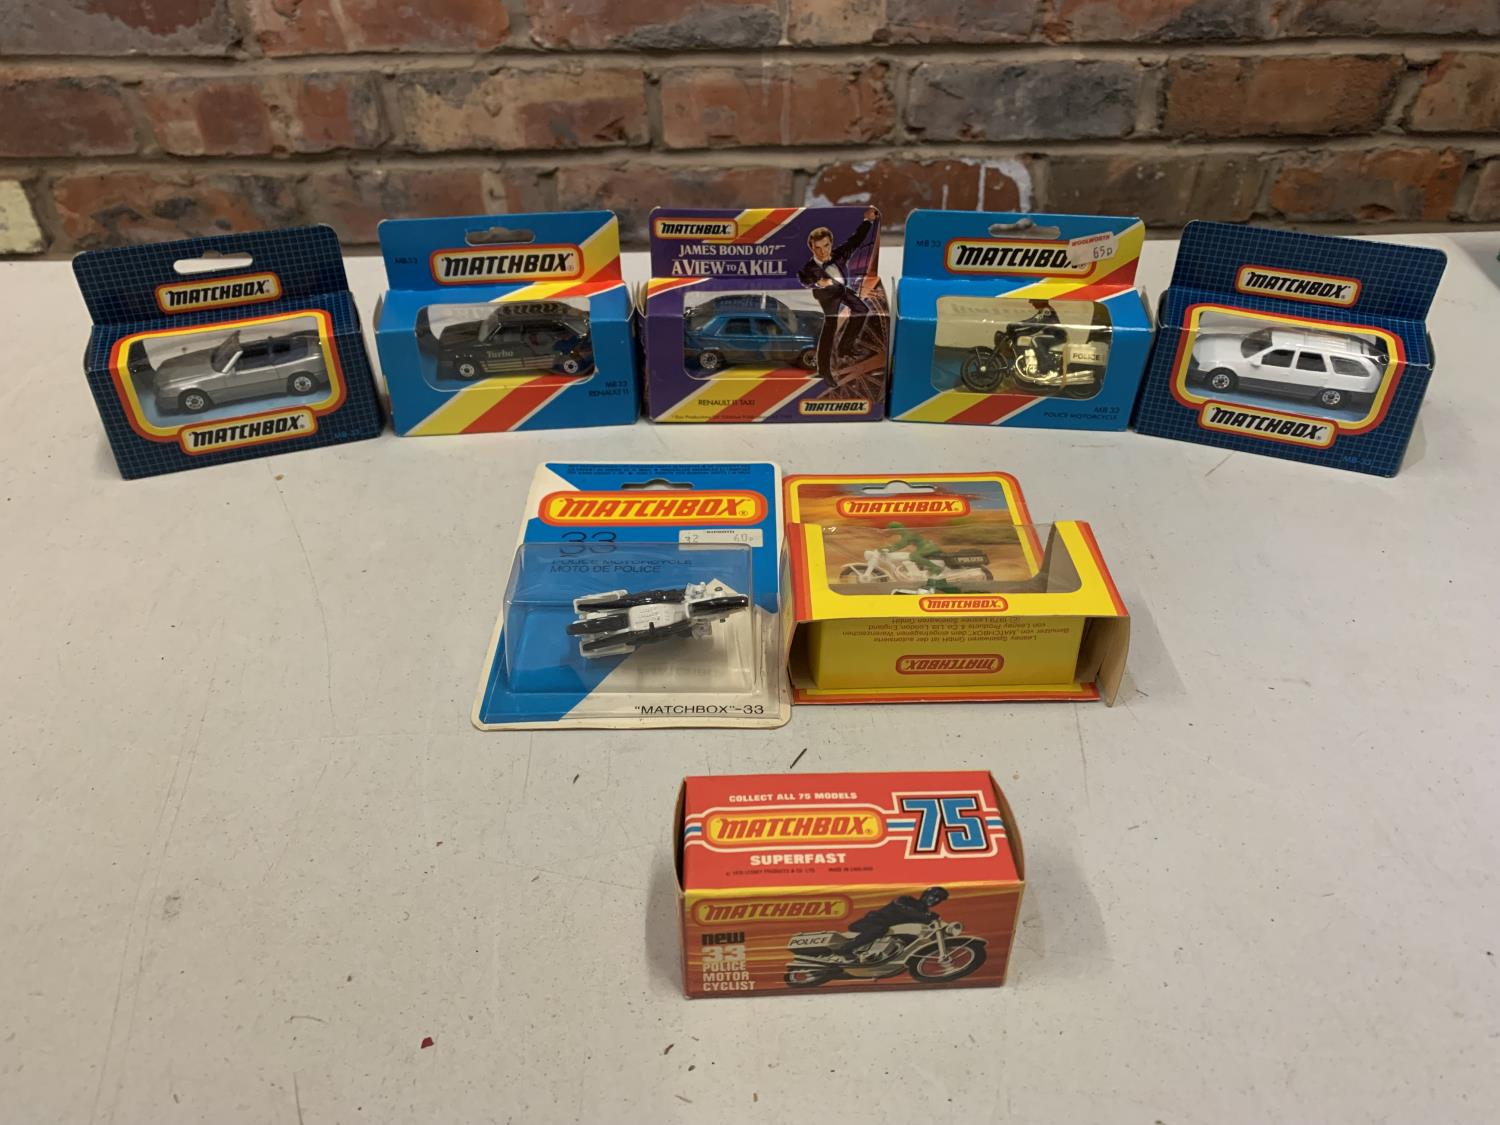 A COLLECTION OF BOXED AND UNBOXED MATCHBOX VEHICLES - ALL MODEL NUMBER 33 OF VARIOUS ERAS AND